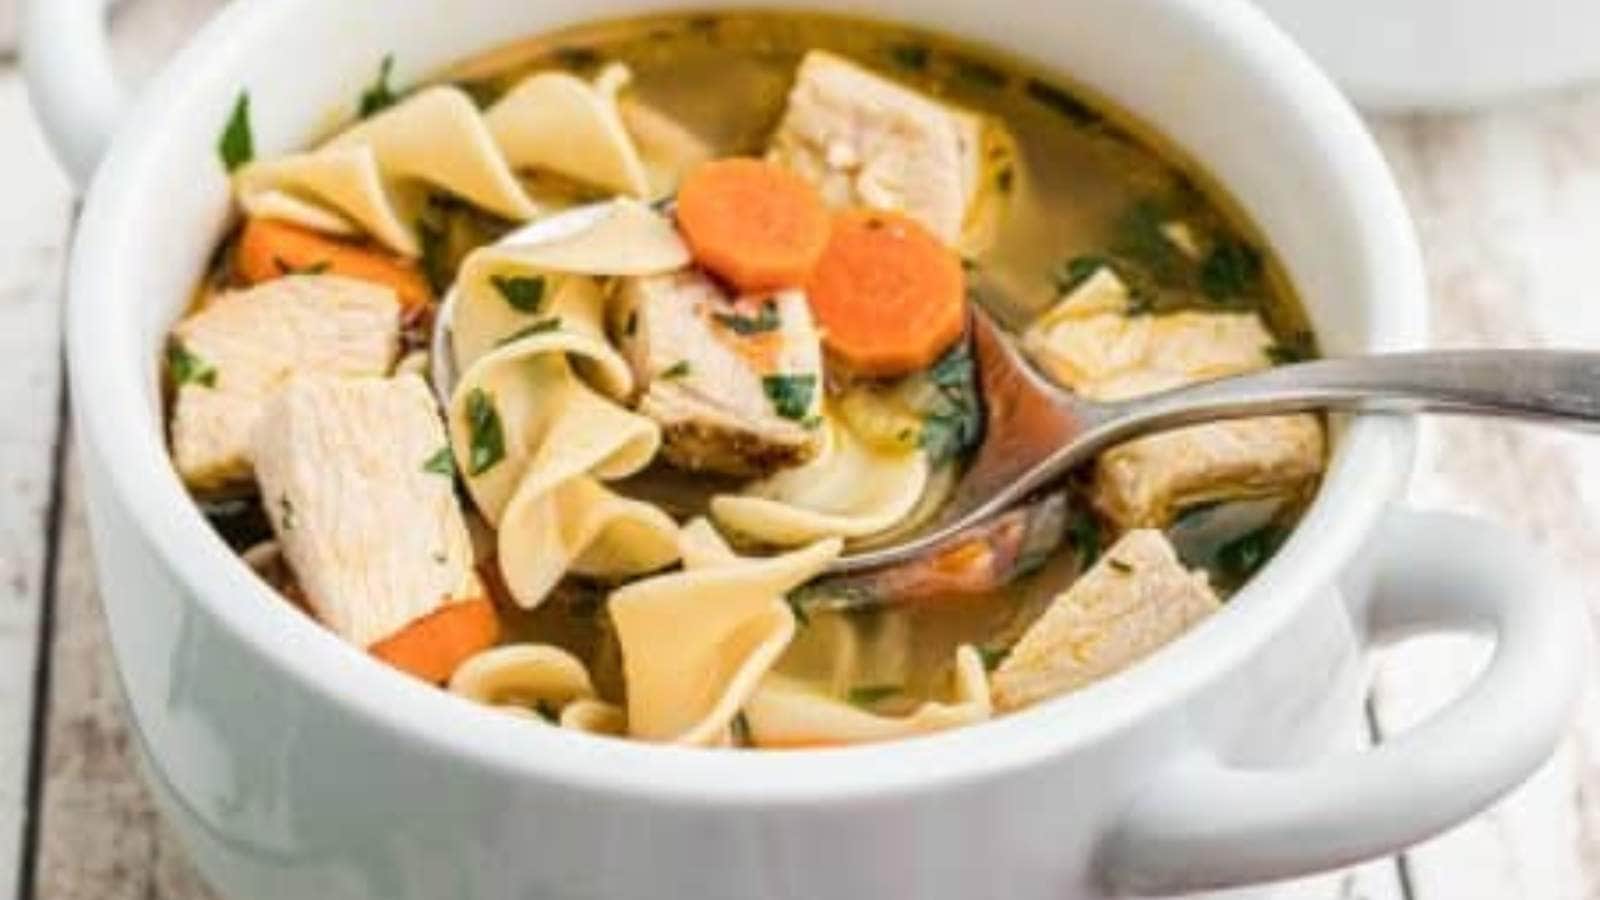 Homemade Turkey Soup recipe by 365 Days Of Baking And More.